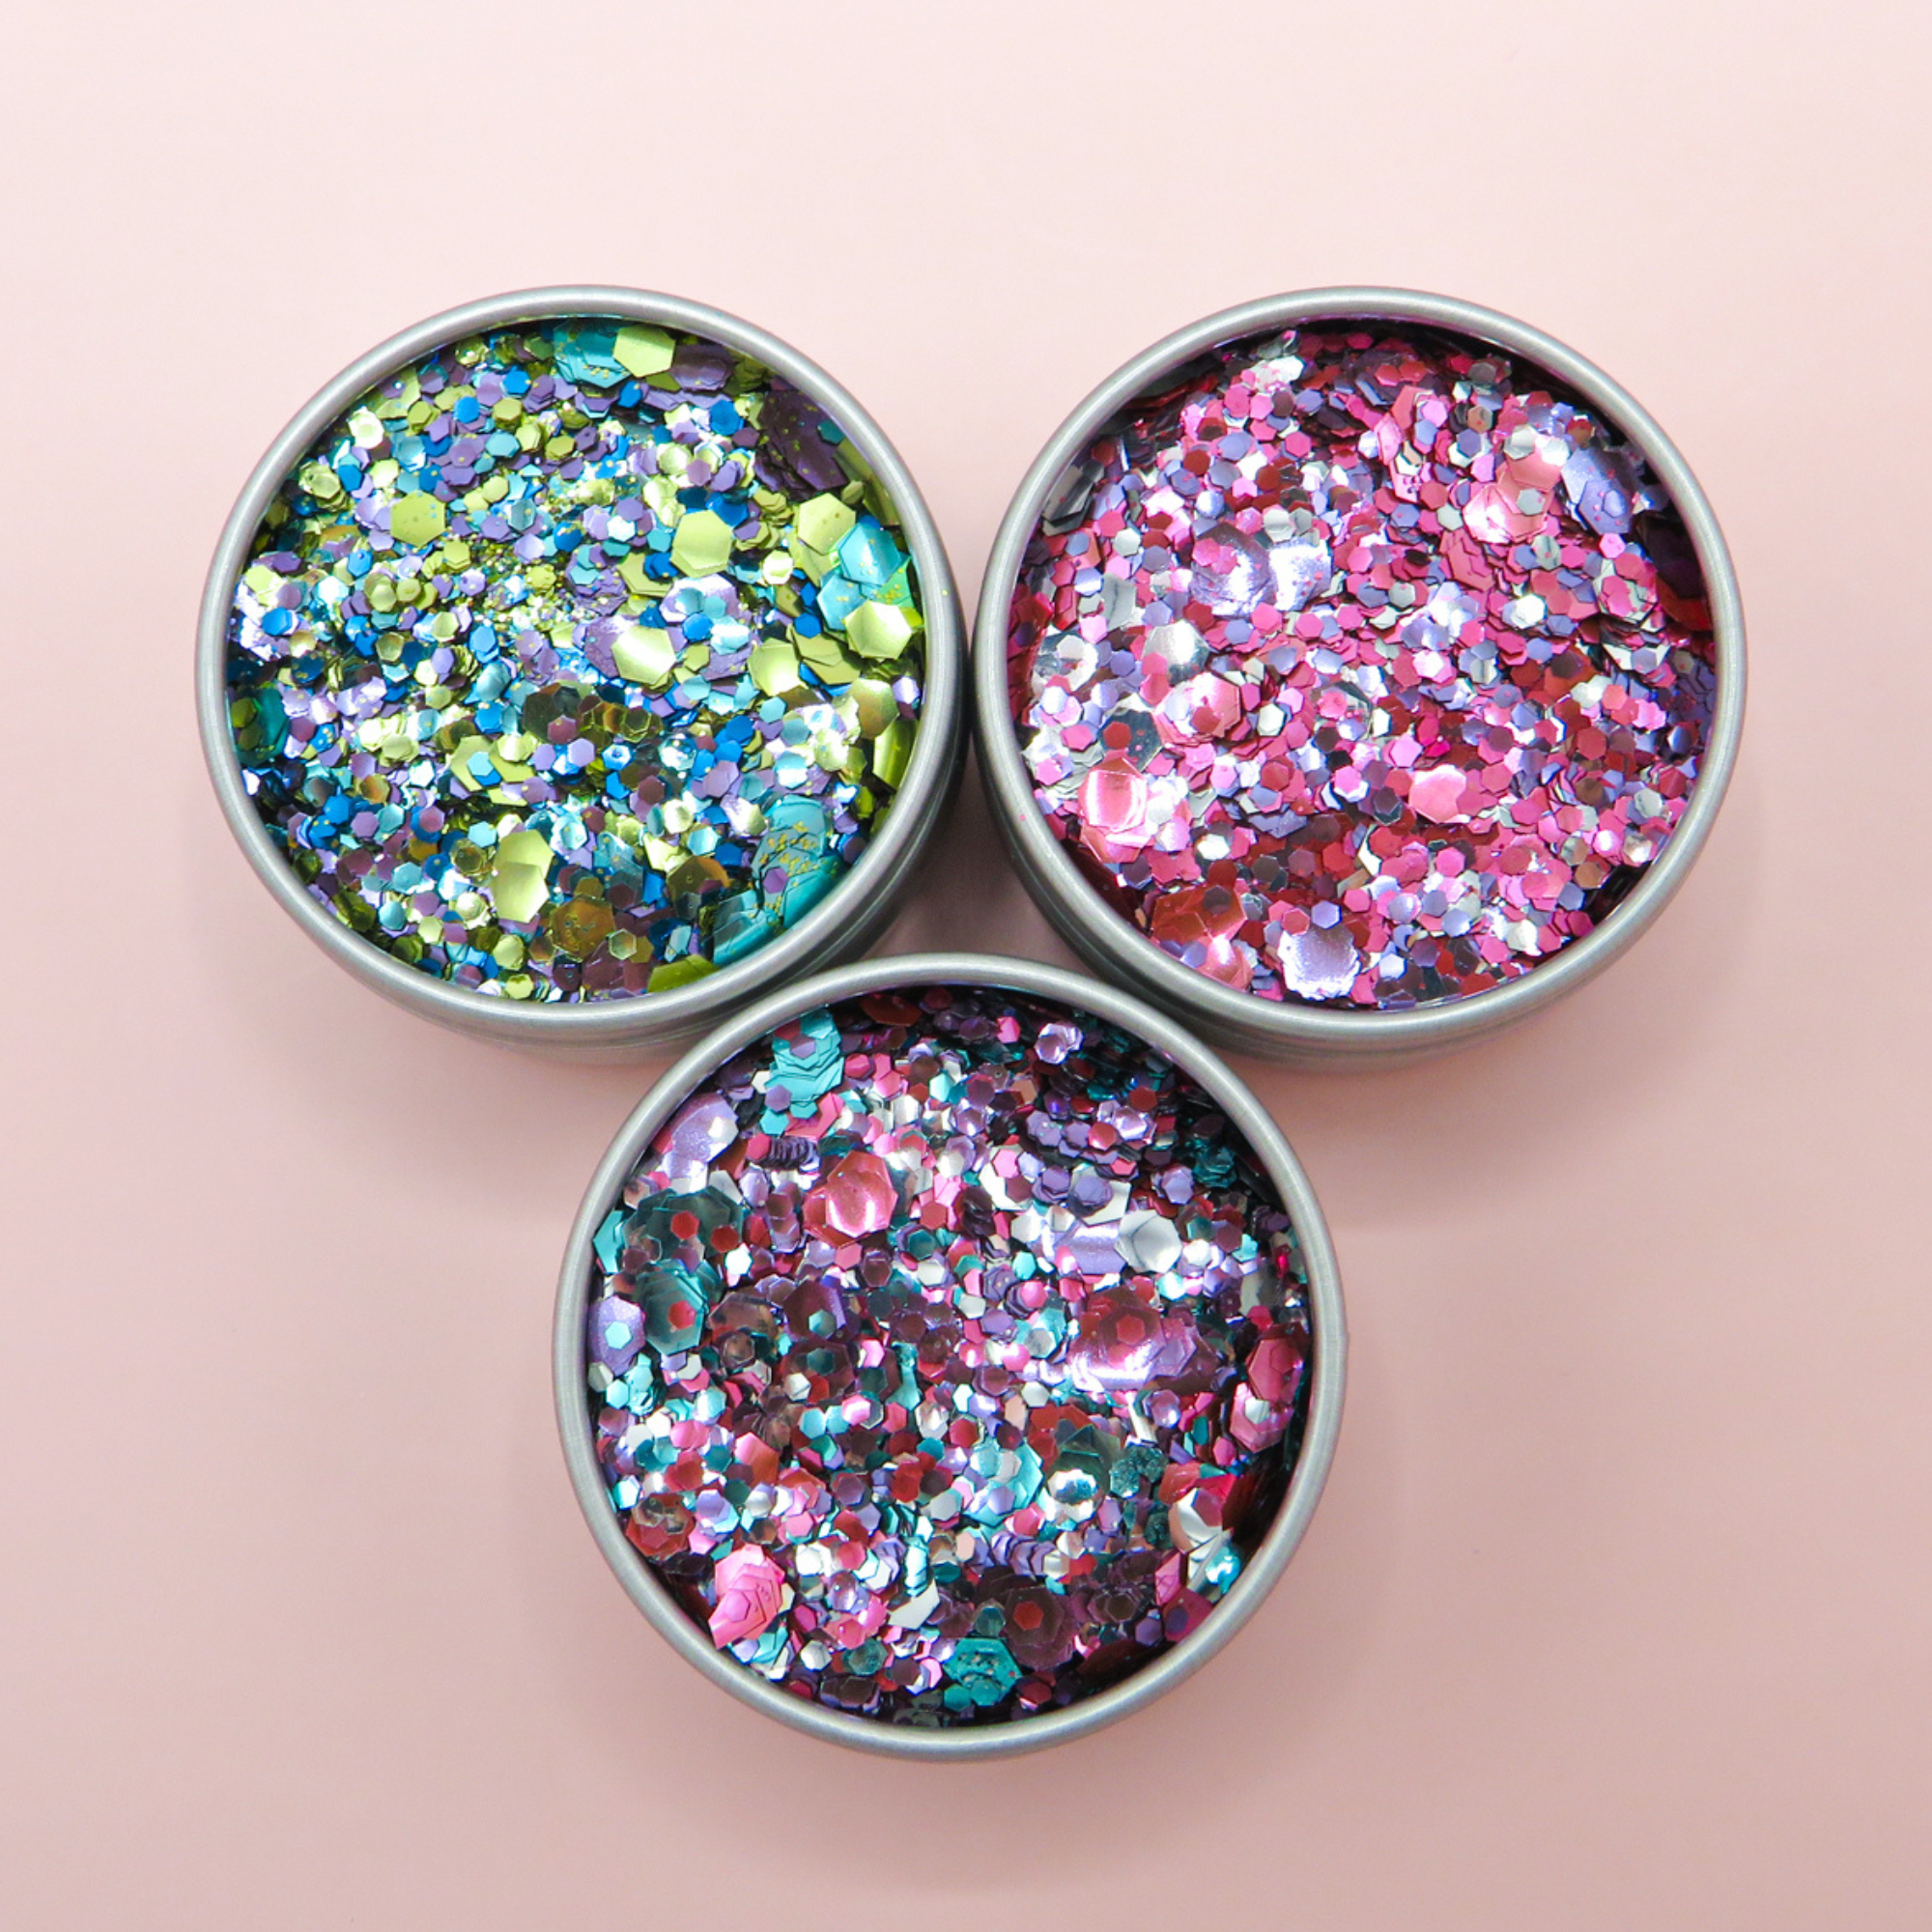 Trio of biodegradable cosmetic glitter with pinks, silvers and purples.